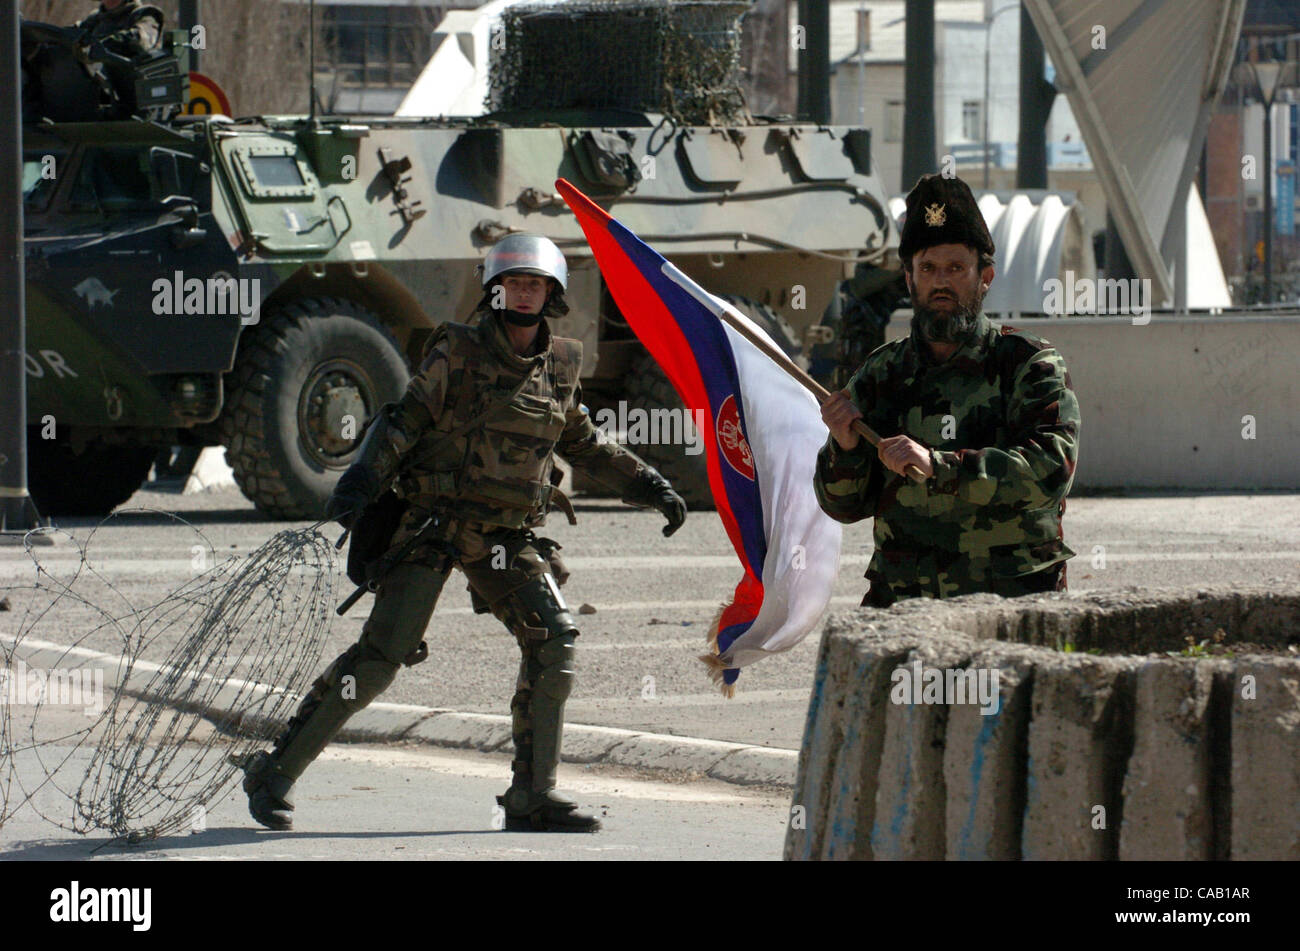 Mar 22, 2004; Kosovo, SERBIA; An unidentified Kosovo Serb civilian, dressed in camouflage uniform and traditional headgear, waves the Serbian flag in front of NATO-led peacekeepers armored vehicles in the northern Kosovo city of Kosovska Mitrovica. Several hundred Serbs have been evacuated from the  Stock Photo